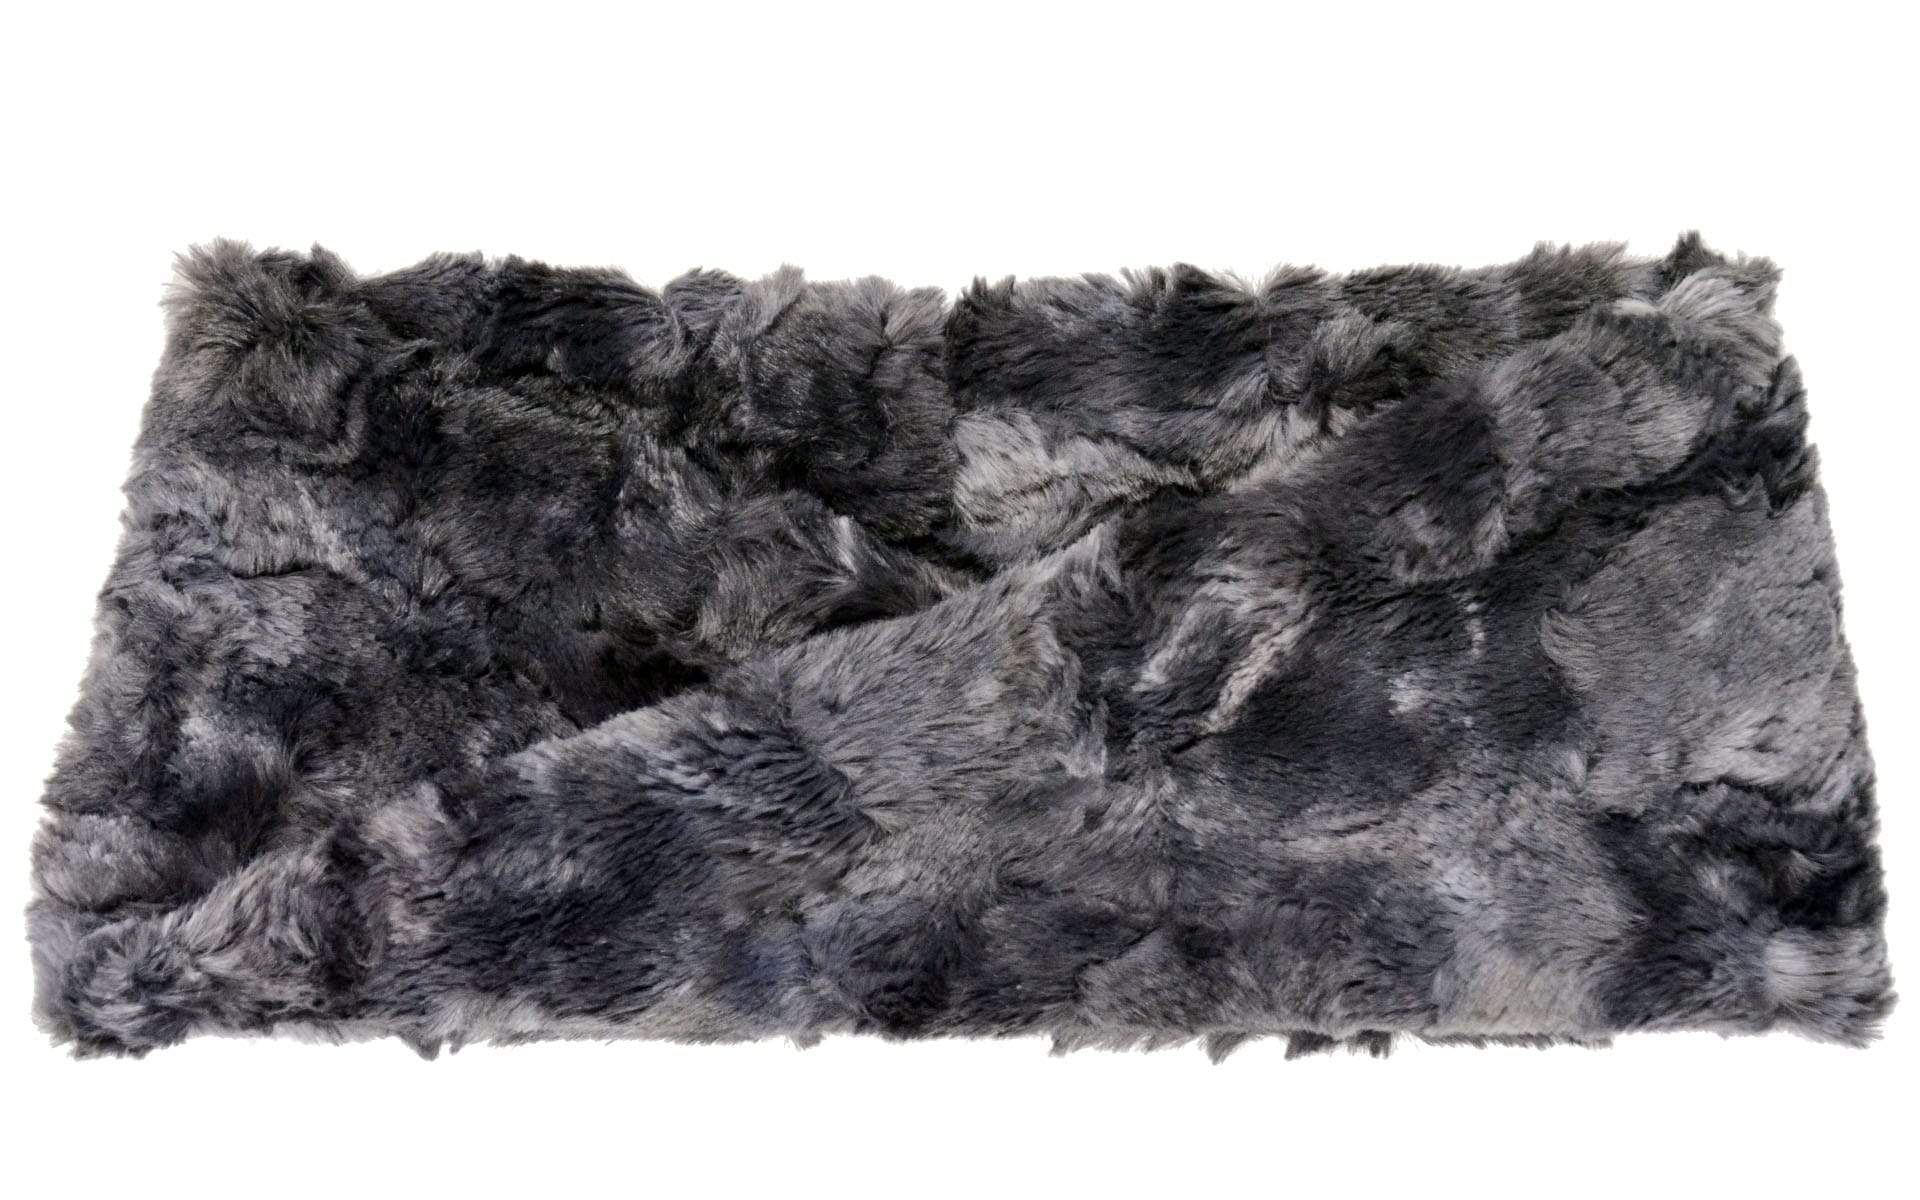 Product shot of Headband, Ear and Neck Warmer | Highland in Skye , Blue and Gray Faux Fur | Handmade by Pandemonium Millinery Seattle, WA USA